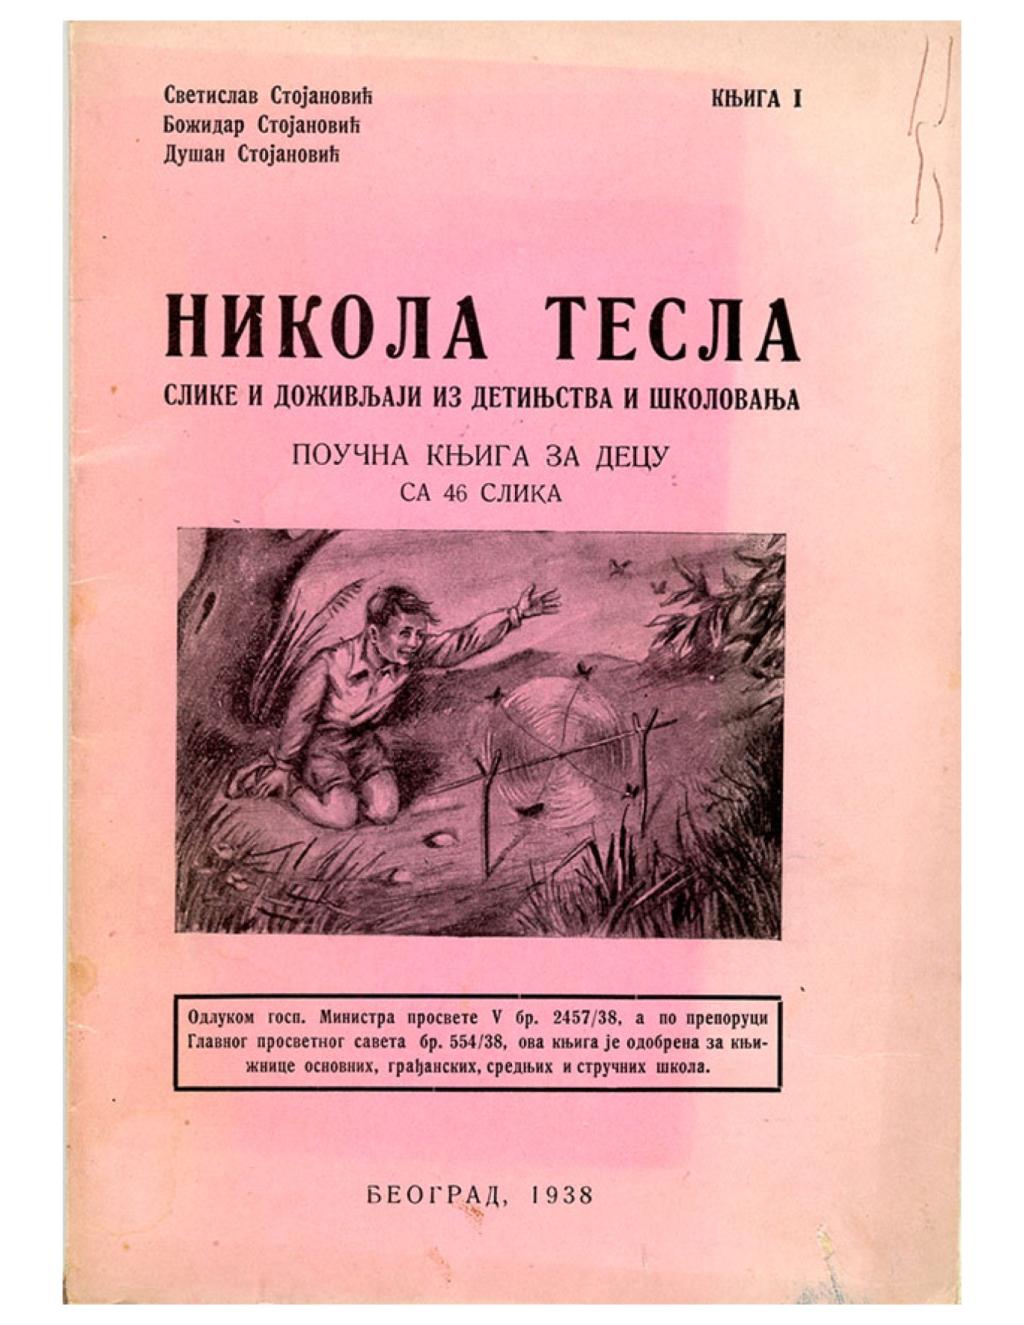 Nikola Tesla - Pictures and Experiences from Childhood and Education - Front cover